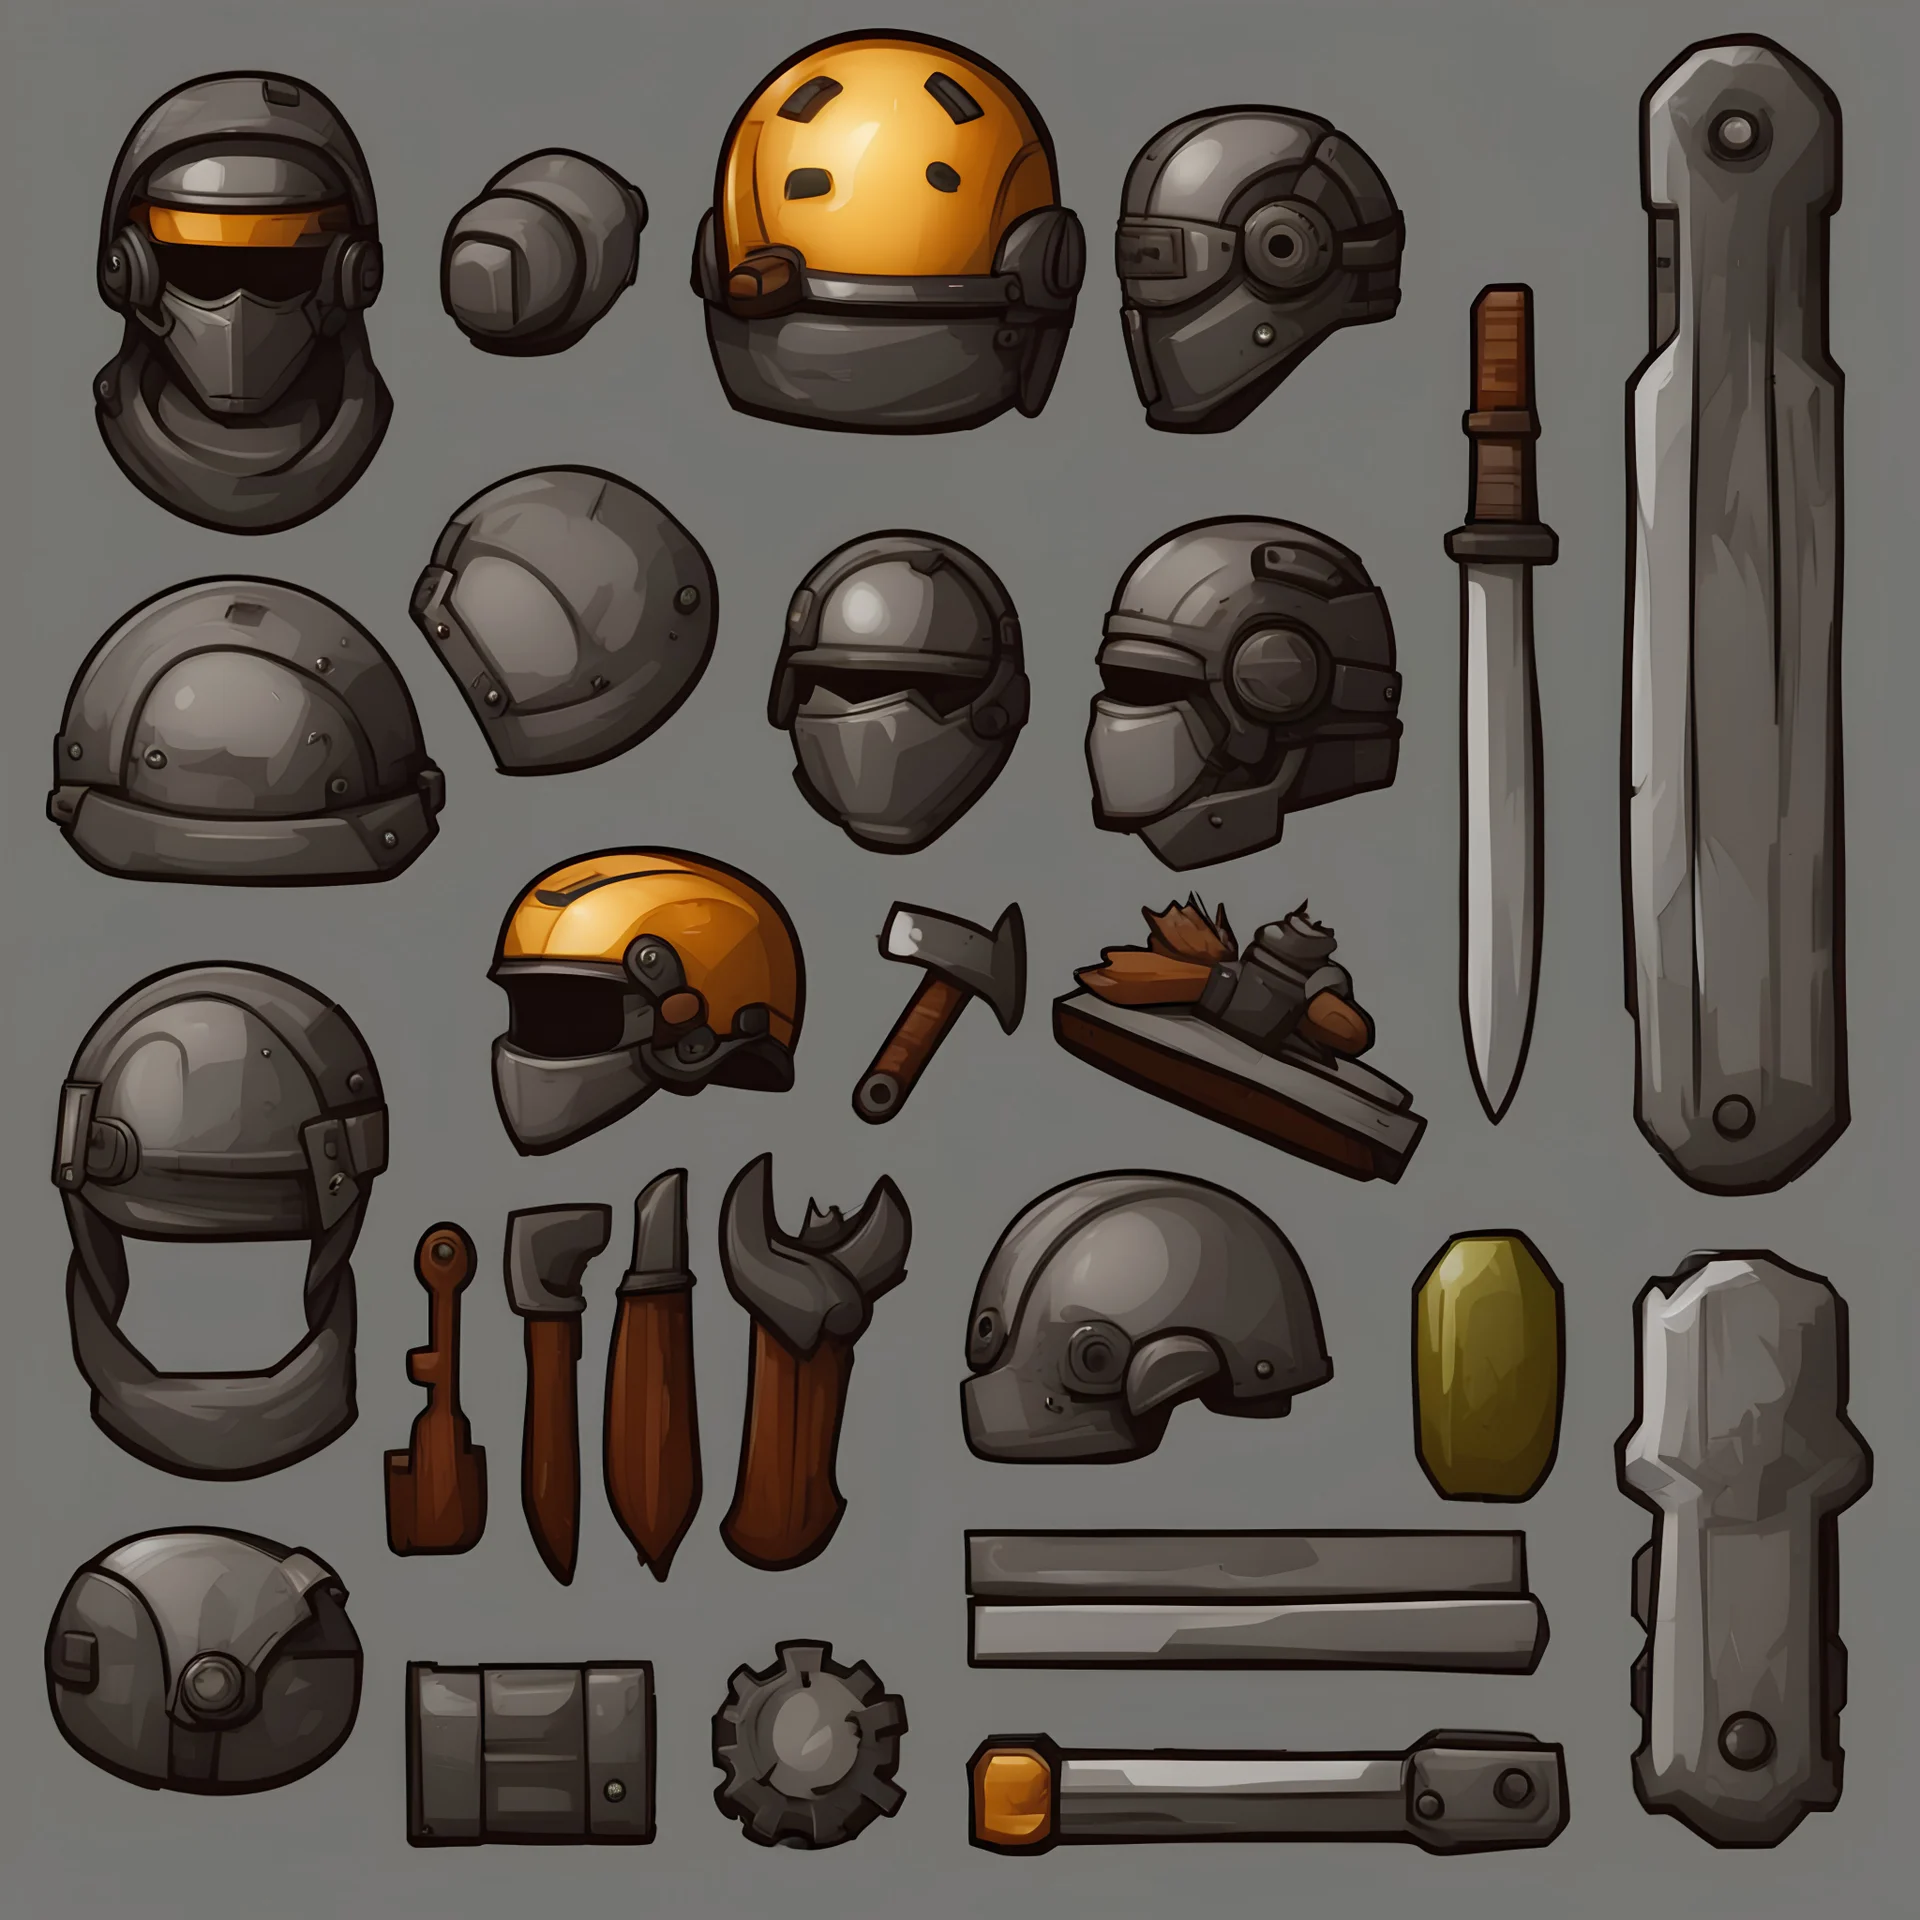 Sprite sheet, tools, gear, helmet, icons, survival game, gray background, comic book,